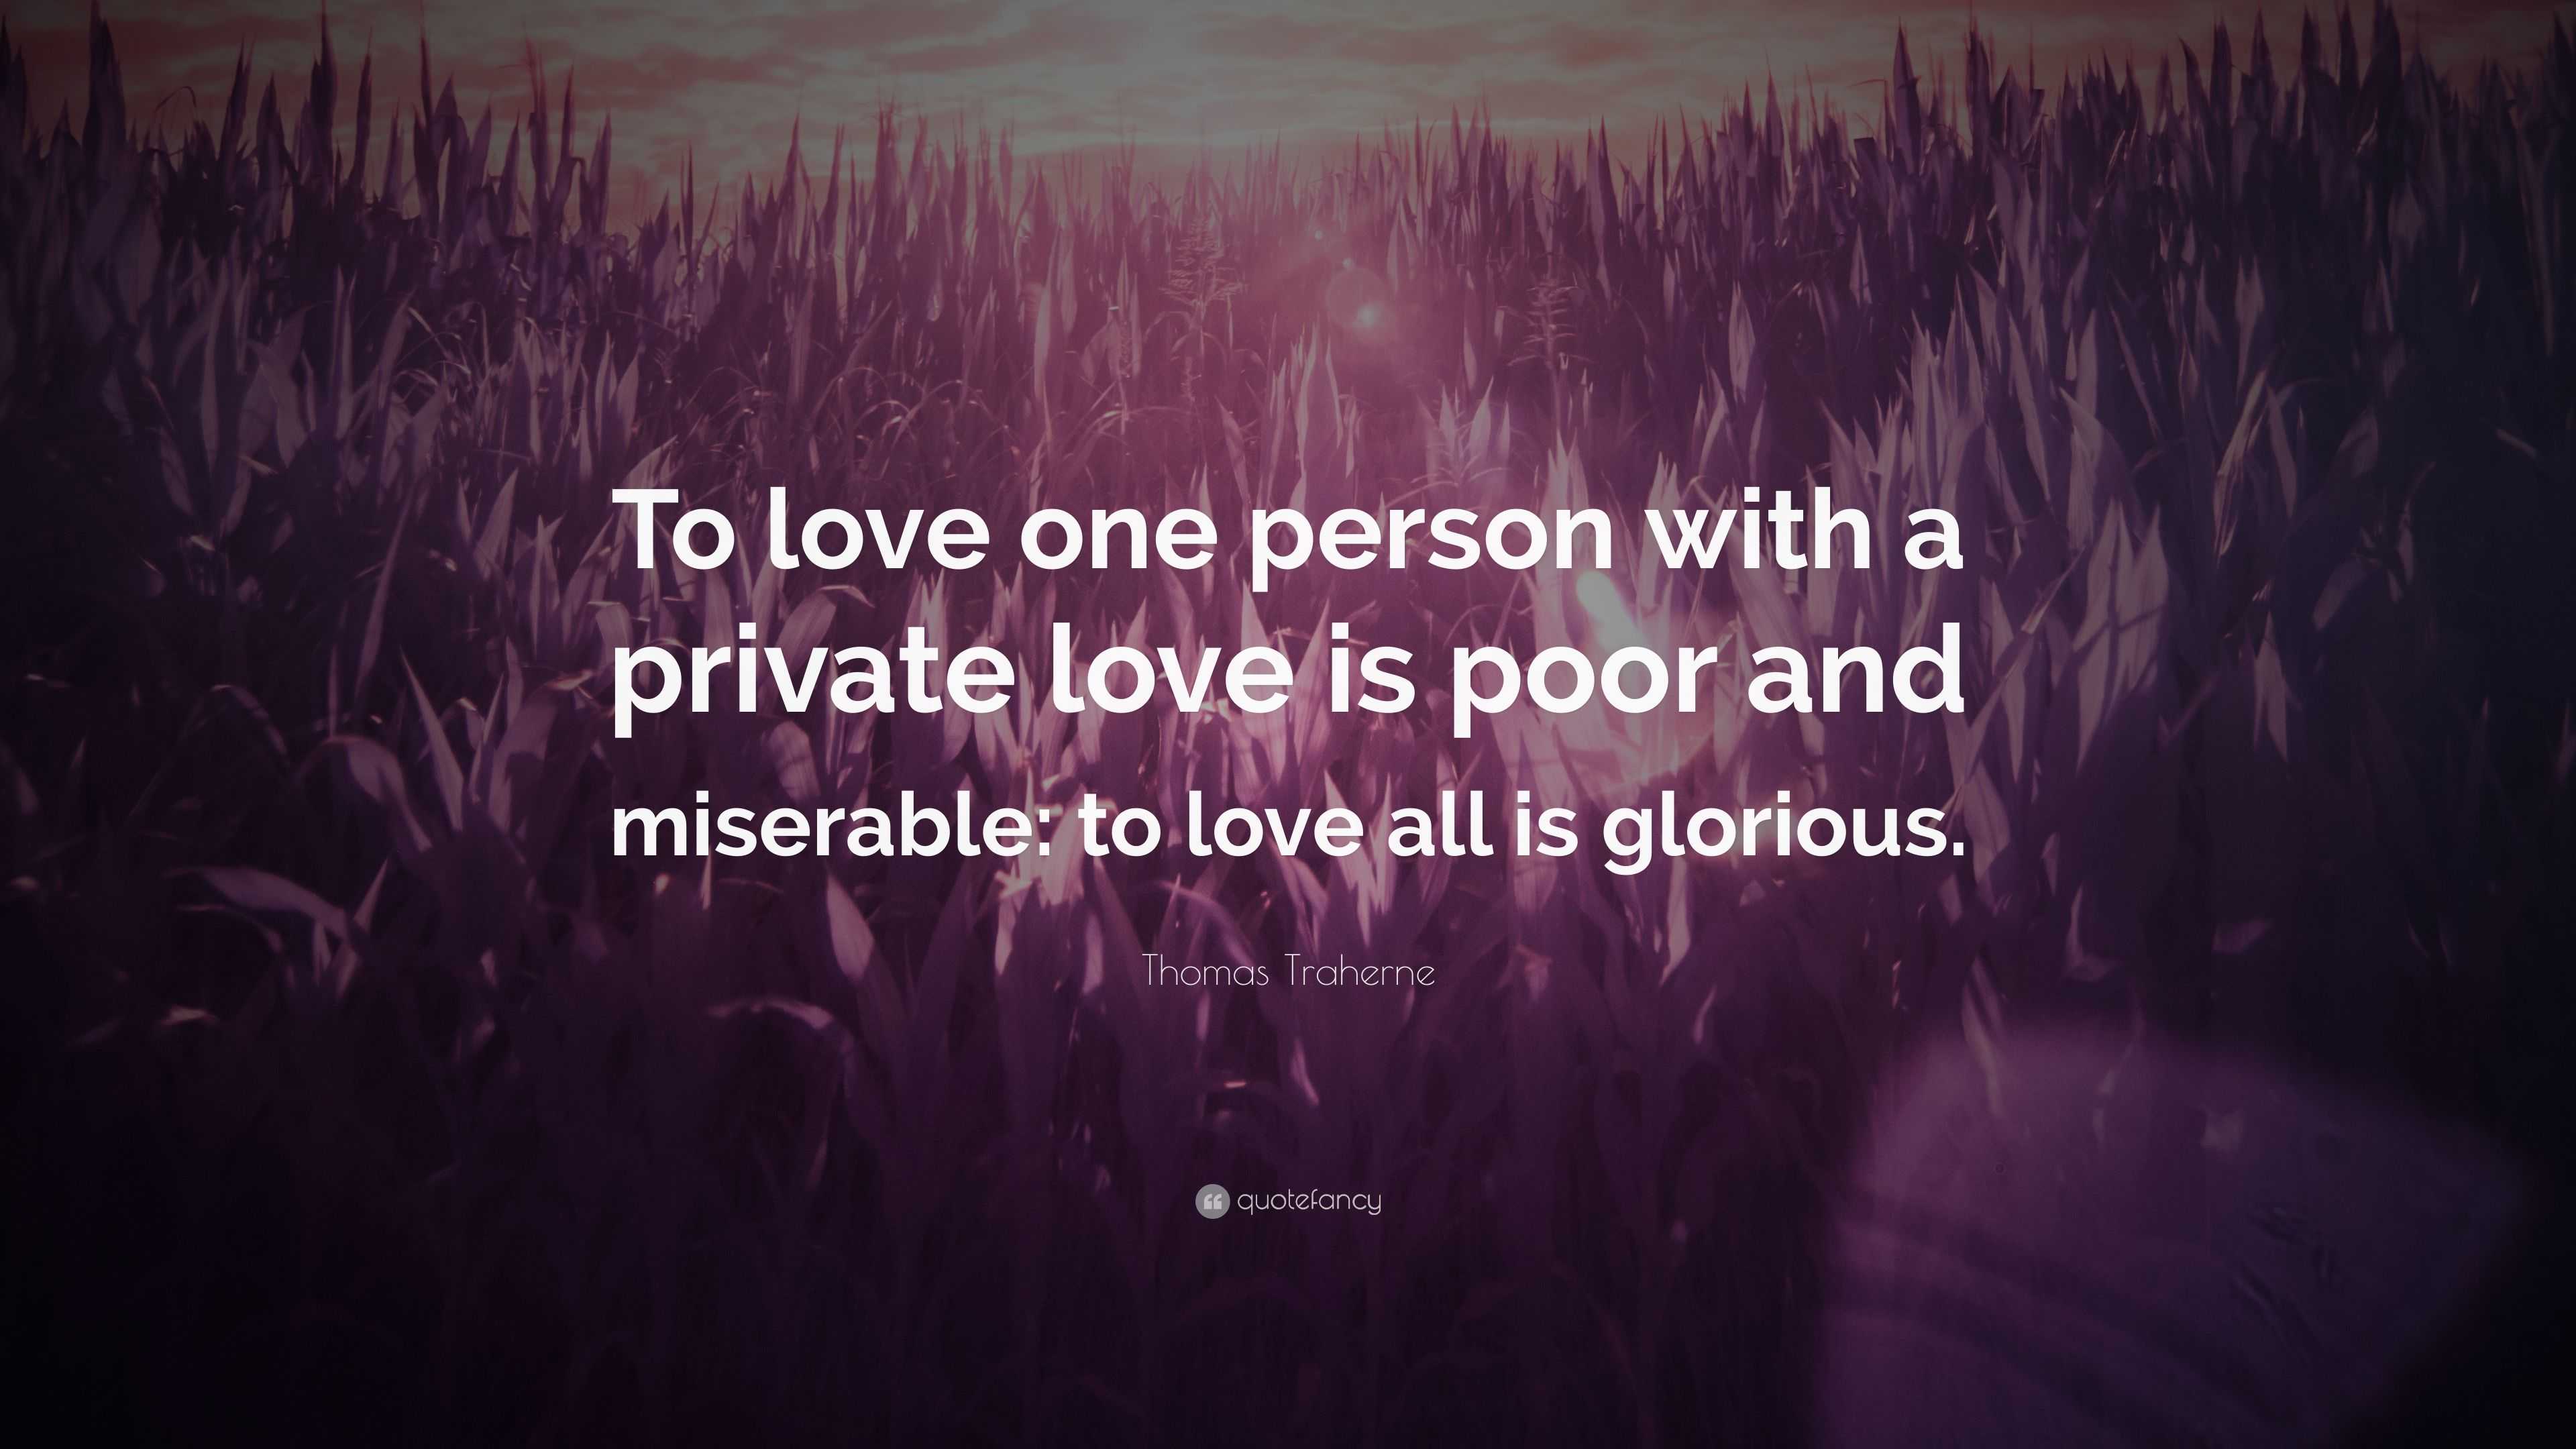 Thomas Traherne Quote “To love one person with a private love is poor and